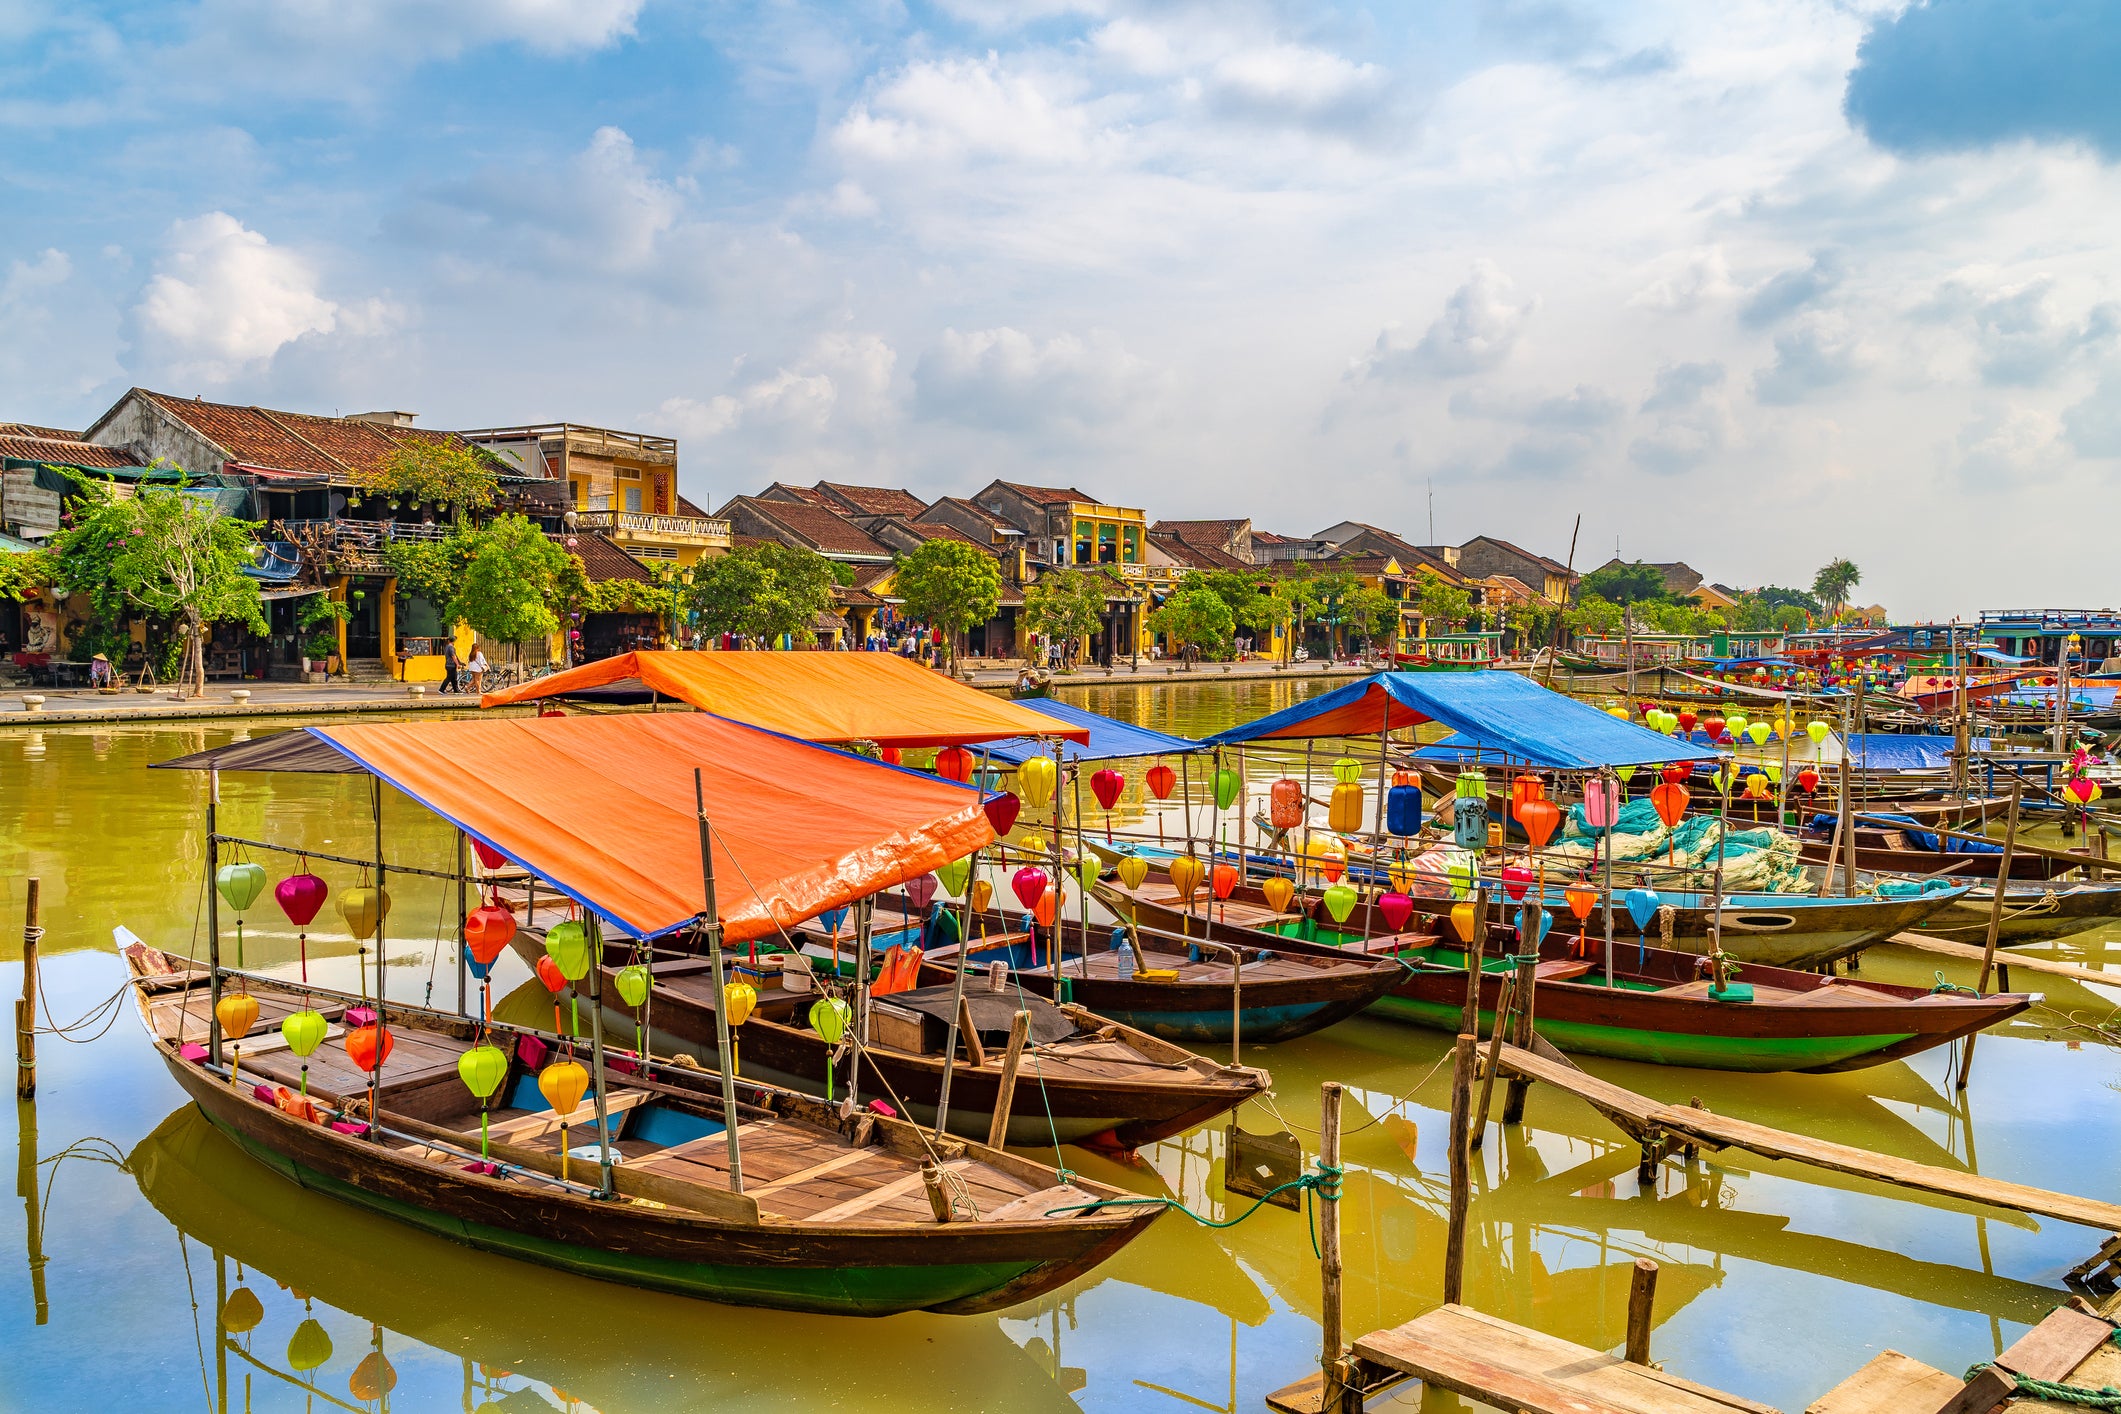 Colourful lanterns decorate wooden boats on the Thu Bon River in Hoi An